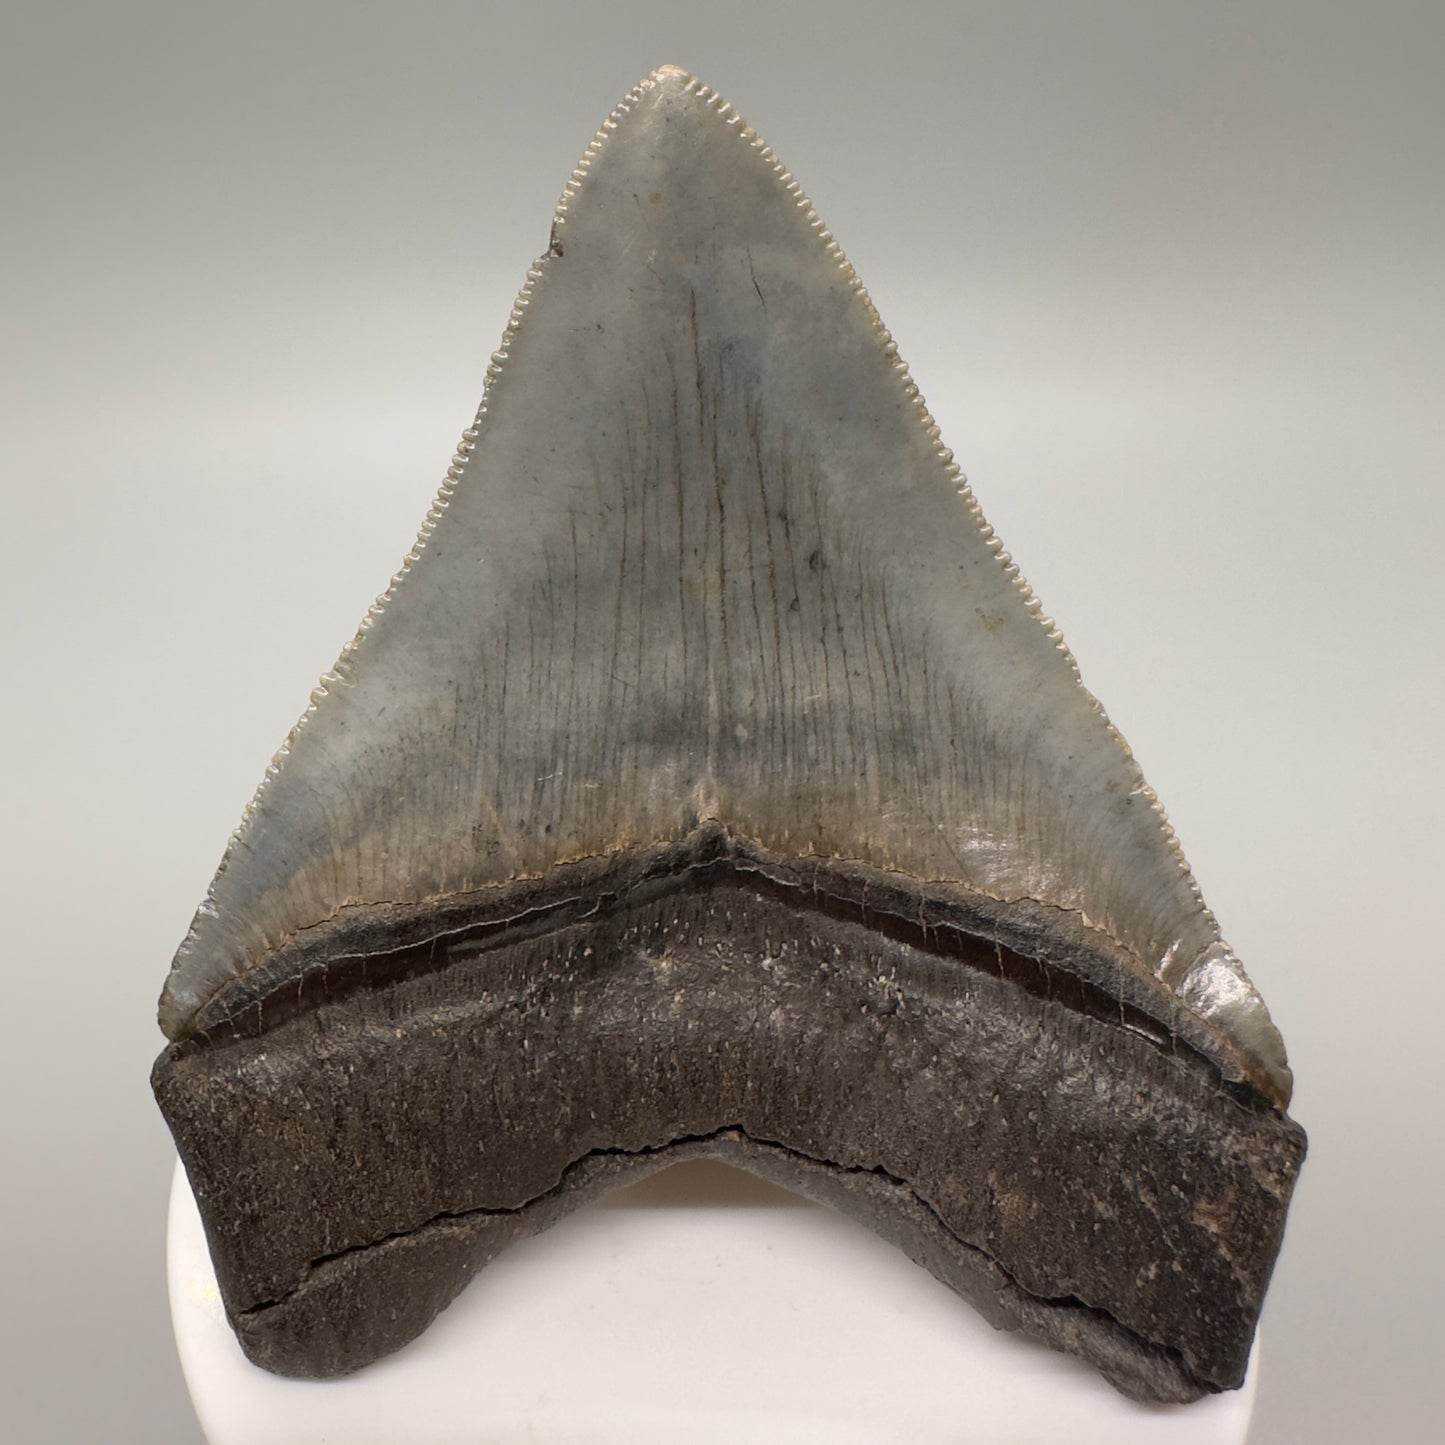 Heart shaped, serrated 3.21" Fossil Megalodon Tooth: Scuba Diving Discovery from Georgia CM4608 - Back